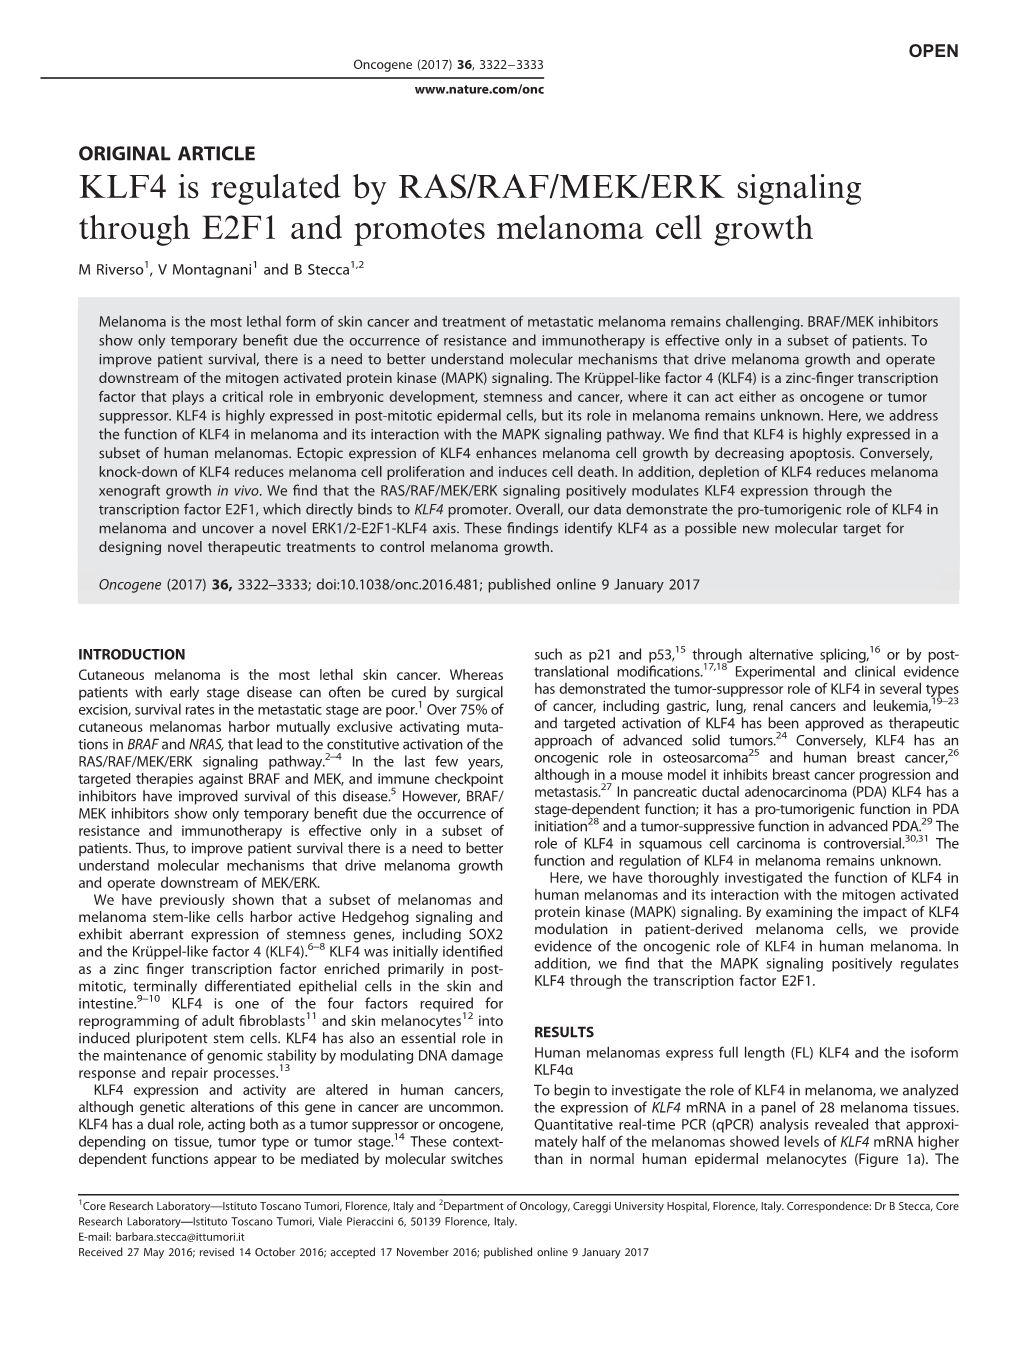 KLF4 Is Regulated by RAS/RAF/MEK/ERK Signaling Through E2F1 and Promotes Melanoma Cell Growth